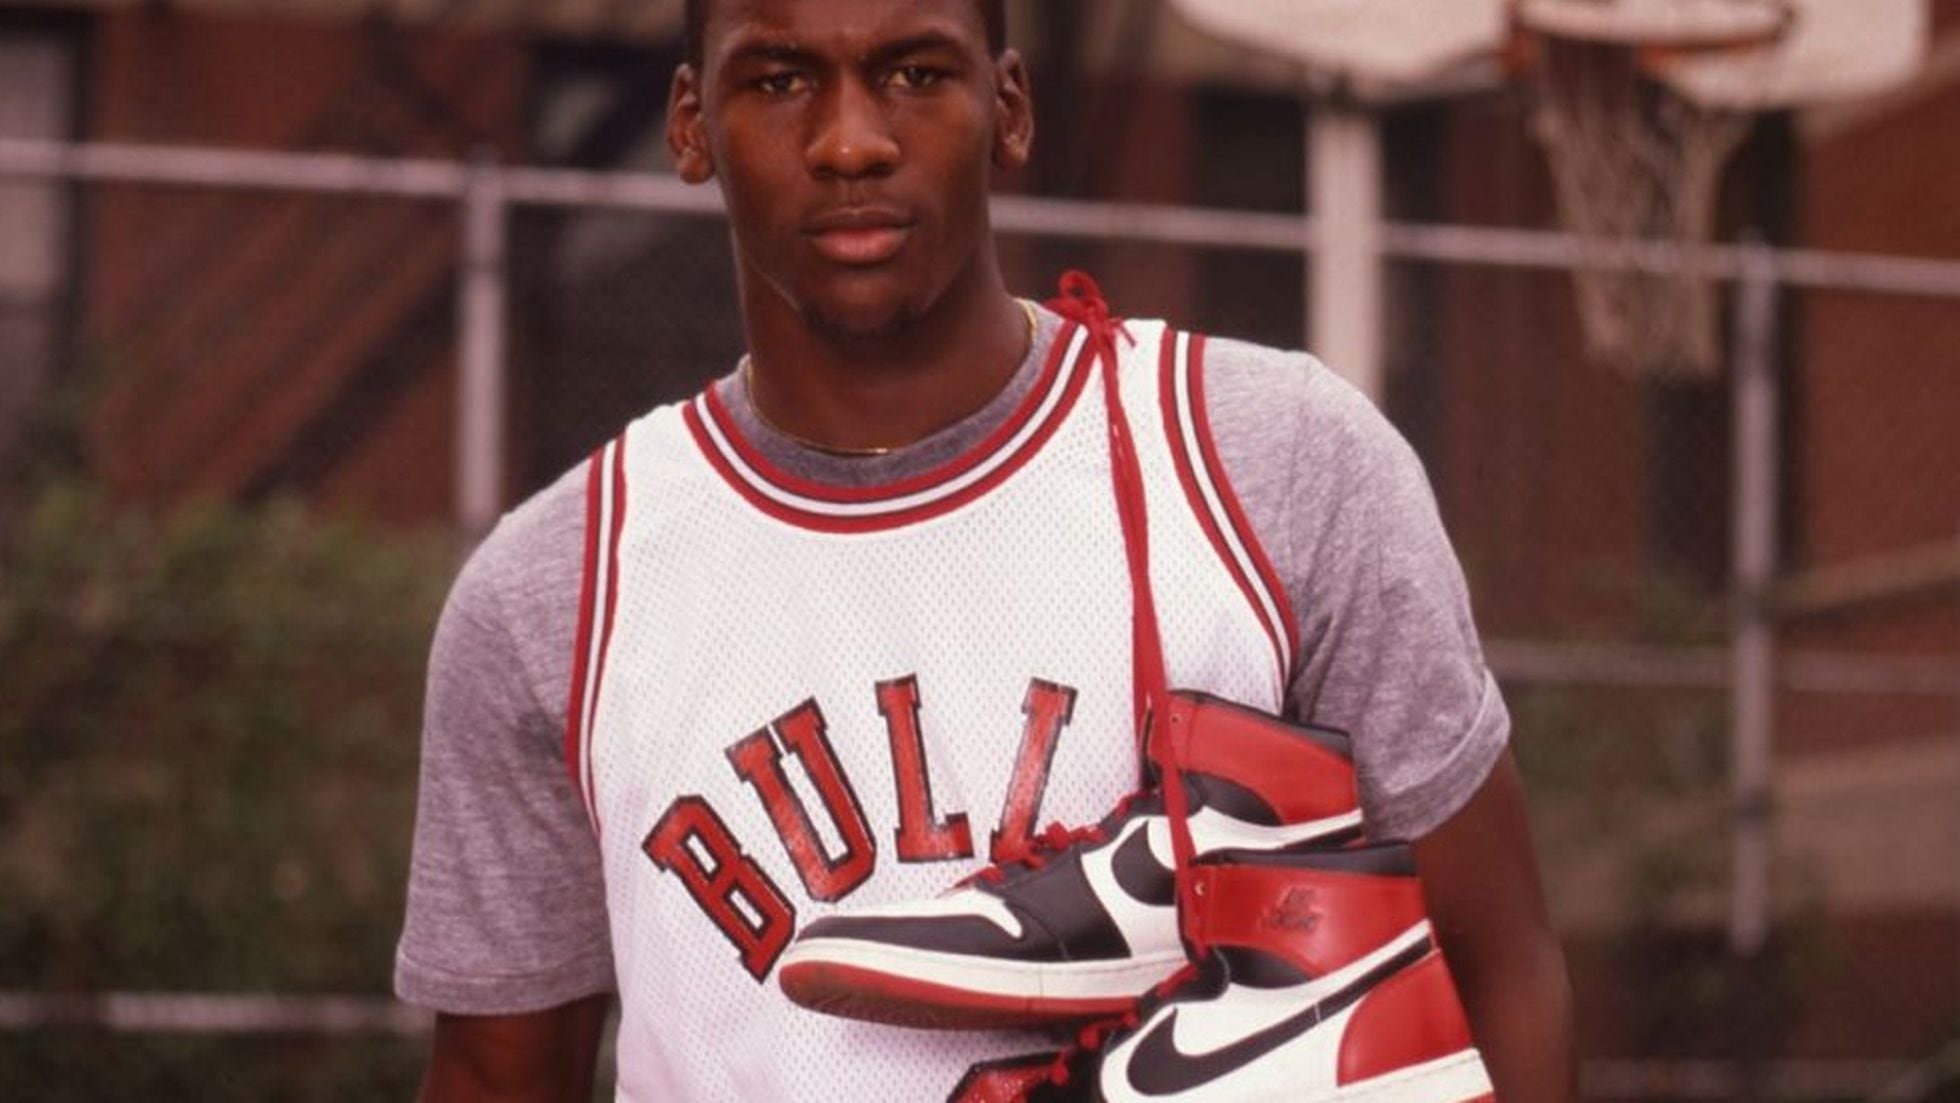 The day Michael Jordan's mother changed Nike's forever: 'Even if don't like it, going to listen to them' | Culture | EL PAÍS English